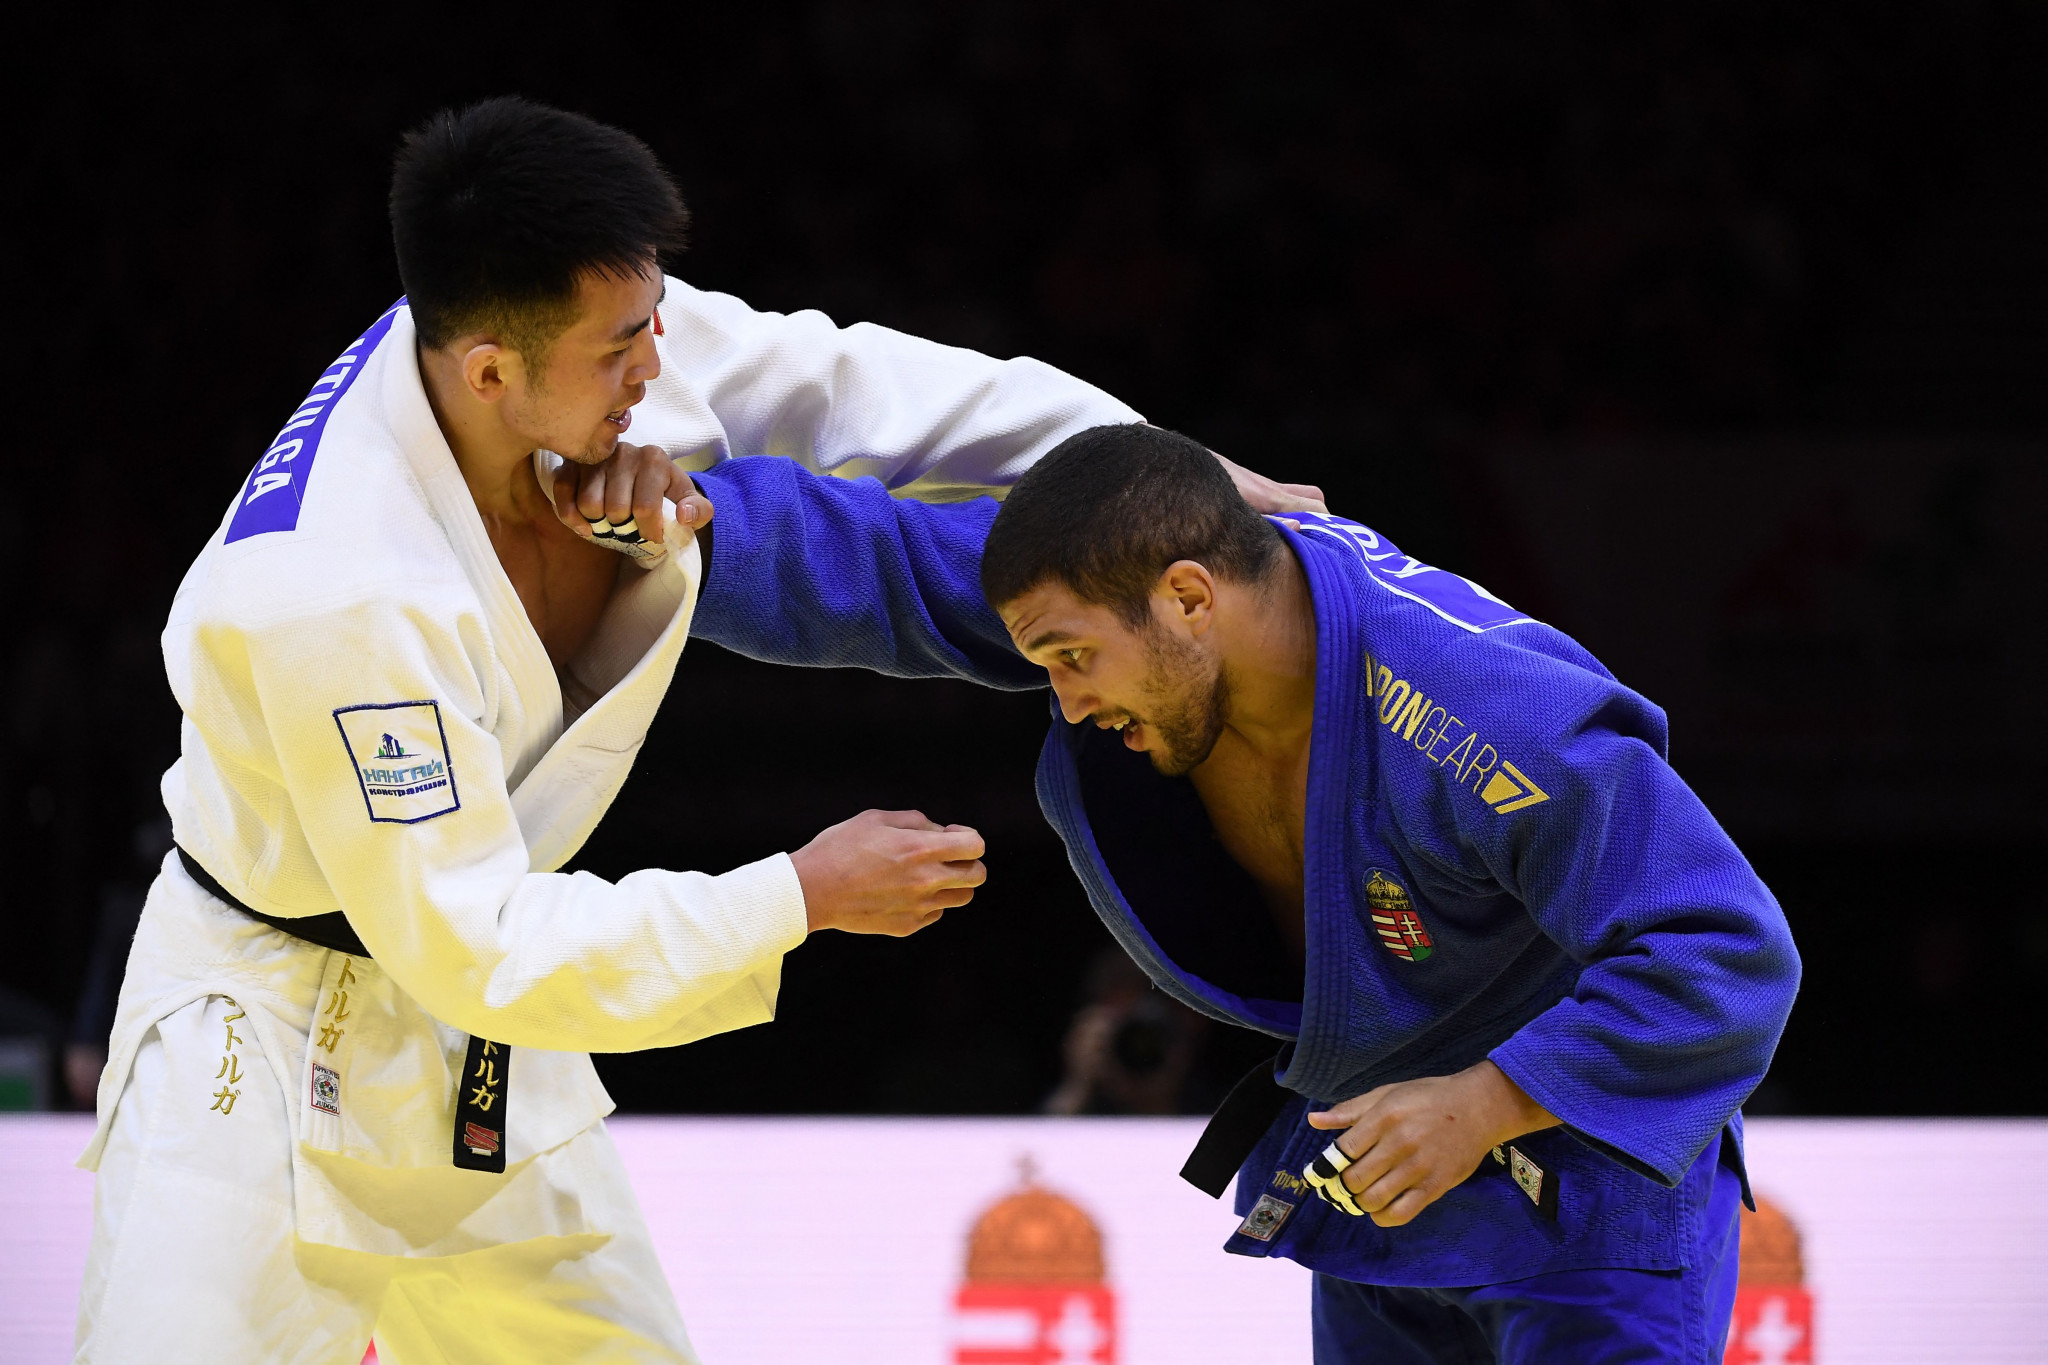 Krisztián Tóth, right, fights Mongolian giant Altanbagana Gantulga in the bronze-medal match ©Getty Images